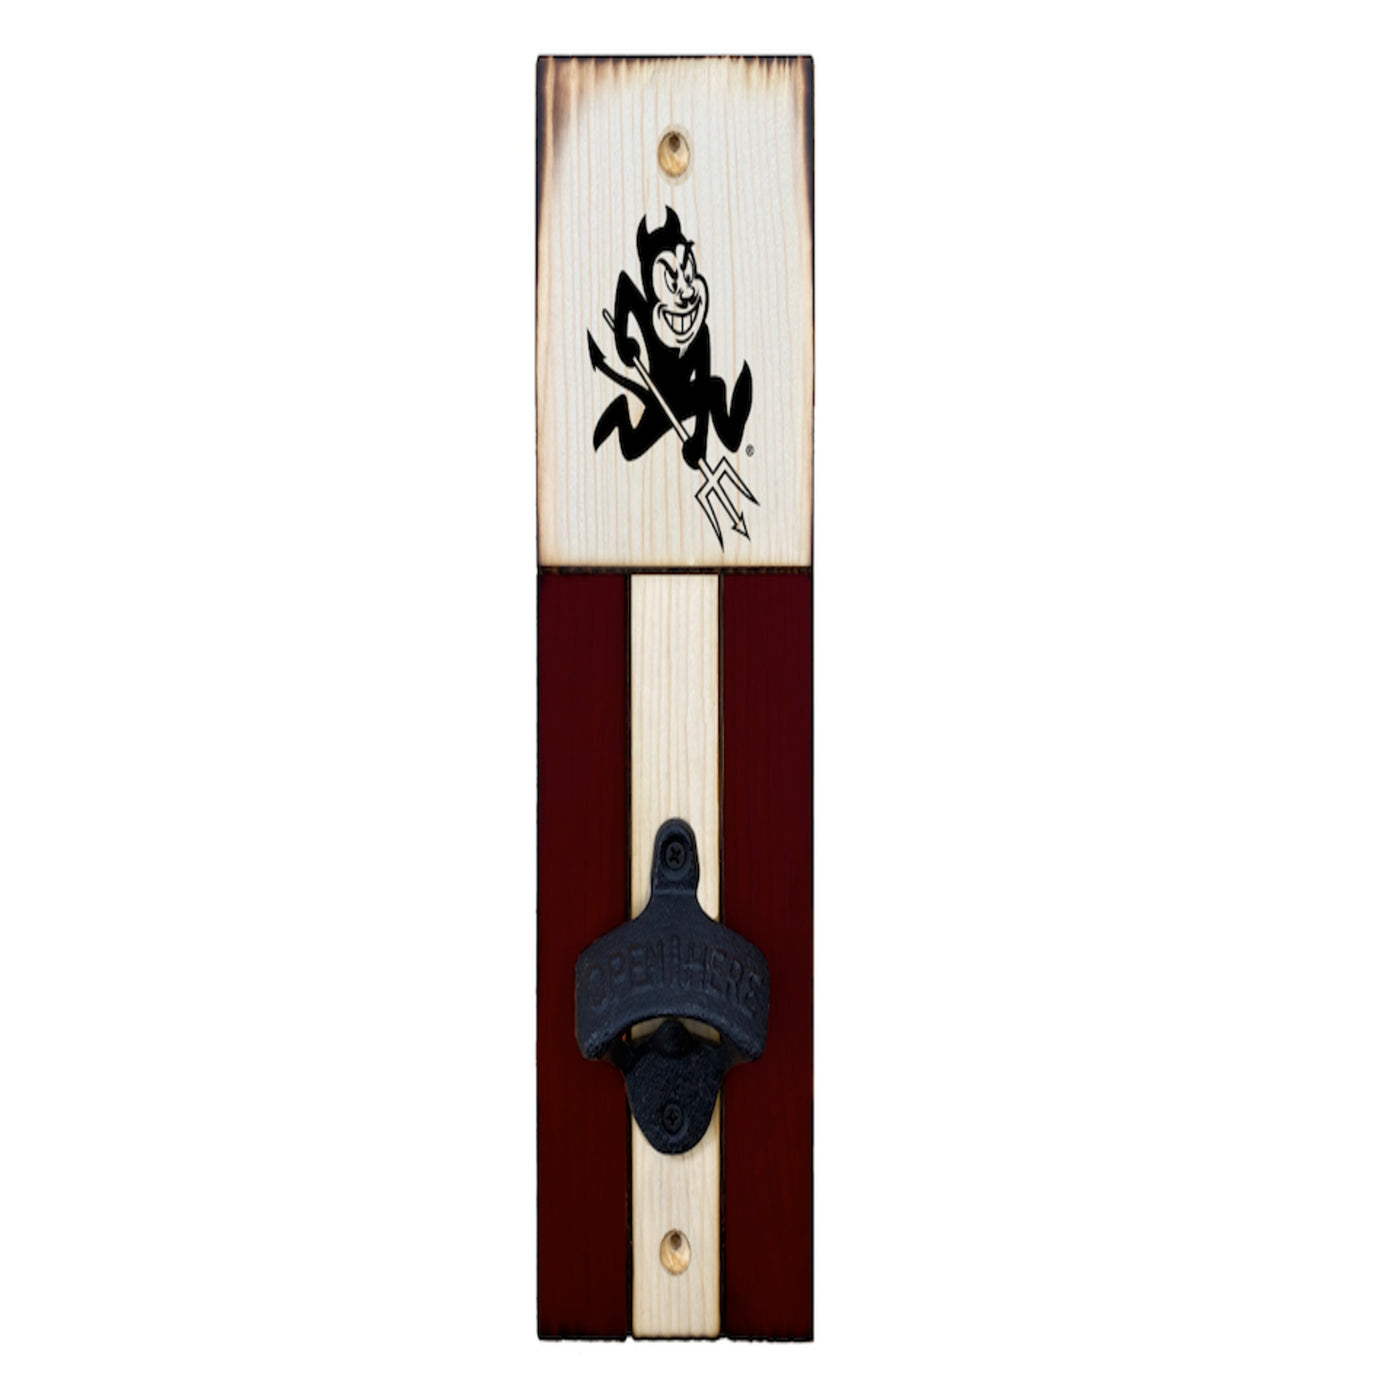 ASU wood wal mount bottle opener with Sparky carved at the top and maroon and pale wood panels at the bottom